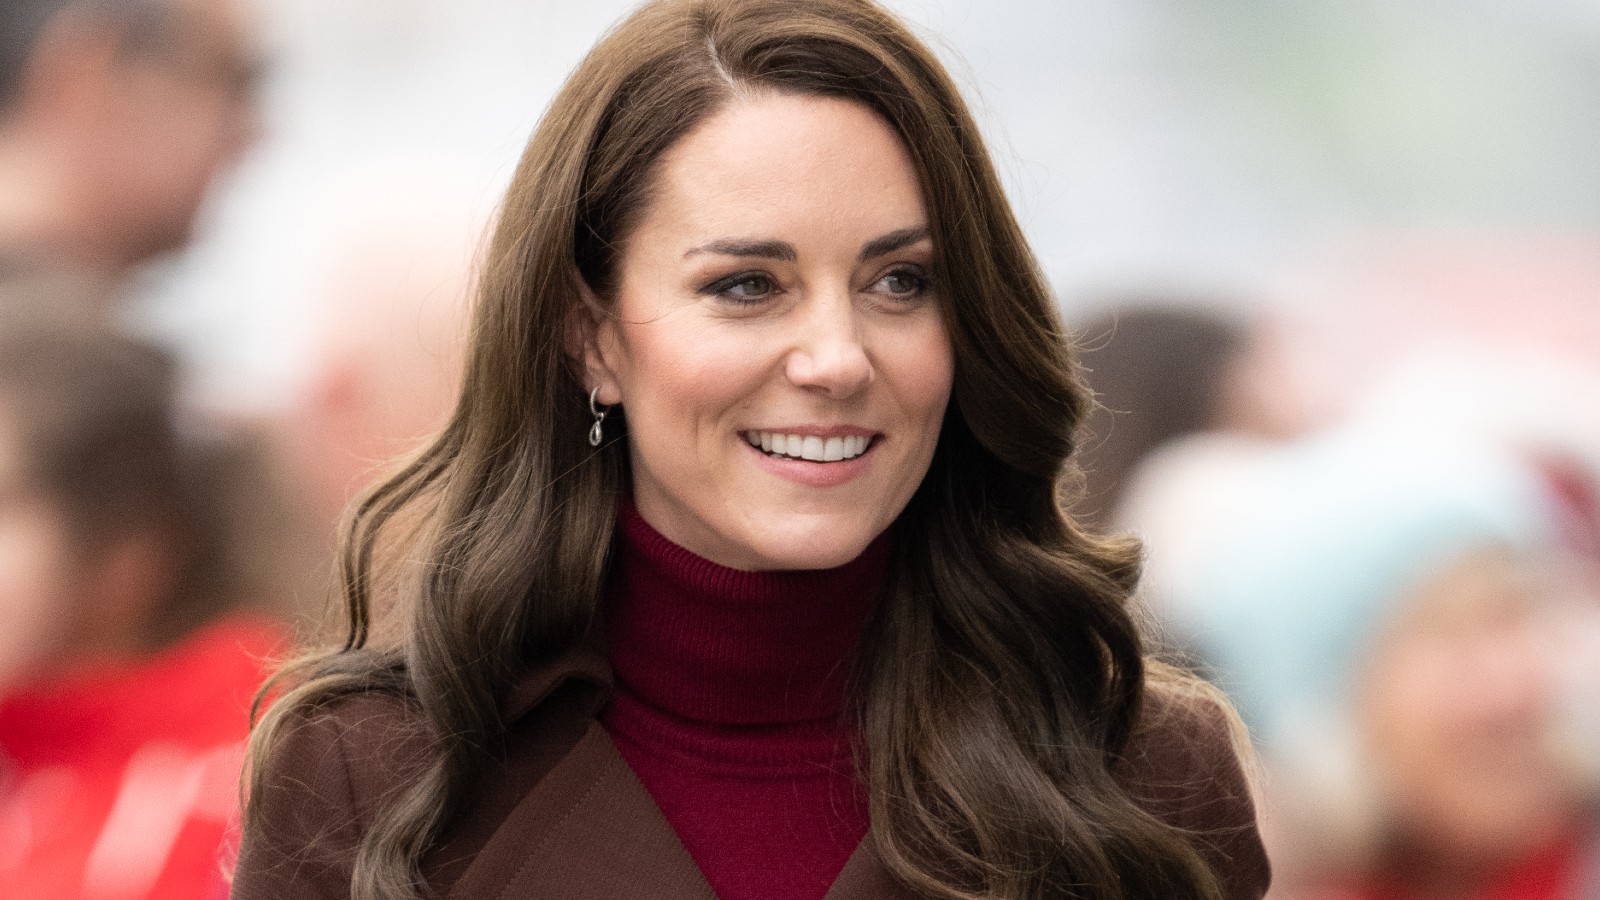 Longchamp Bags Like Kate Middleton's Are on Sale